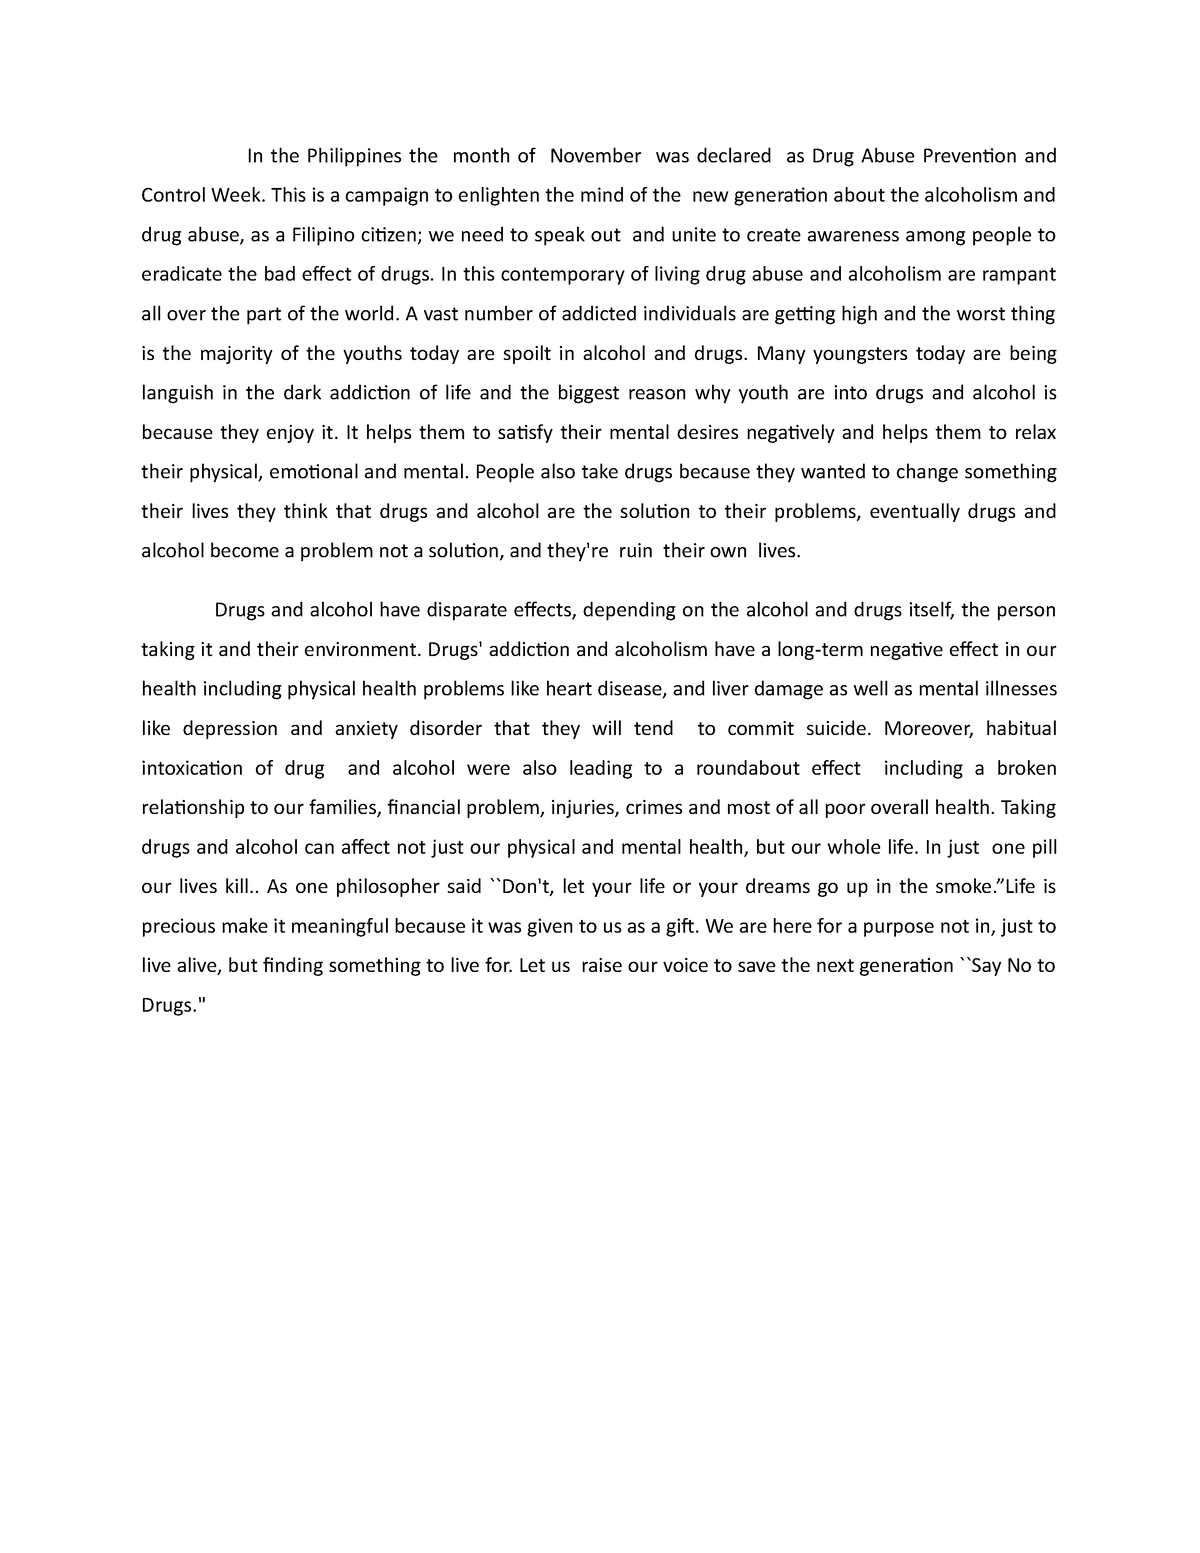 essay about drug abuse in the philippines